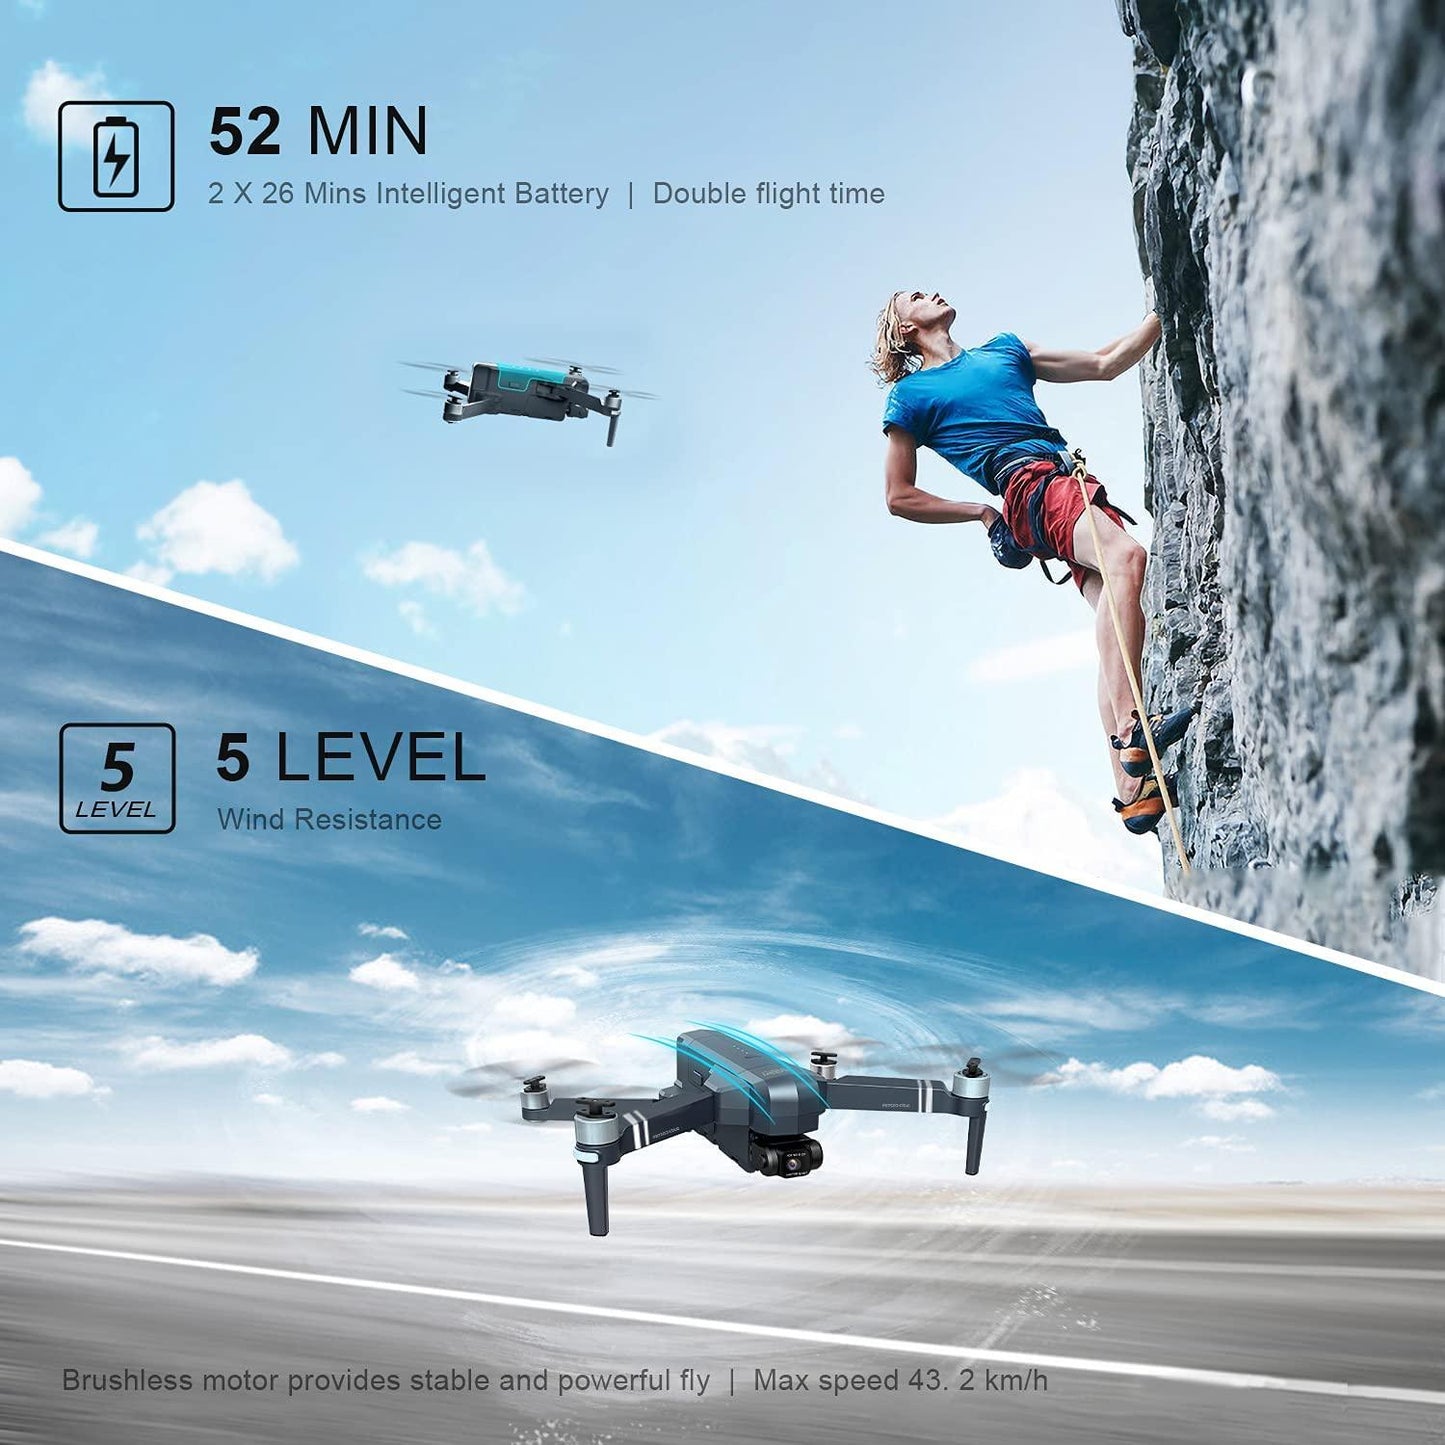 DEERC DE22 GPS Drone - with 4K HD Camera 2-axis Gimbal, EIS Anti-Shake, 5G FPV Live Video Brushless Motor, Auto Return Home, Selfie, Follow Me, Waypoints, Circle Fly 52Min Flight with Carrycase Professional Camera Drone - RCDrone